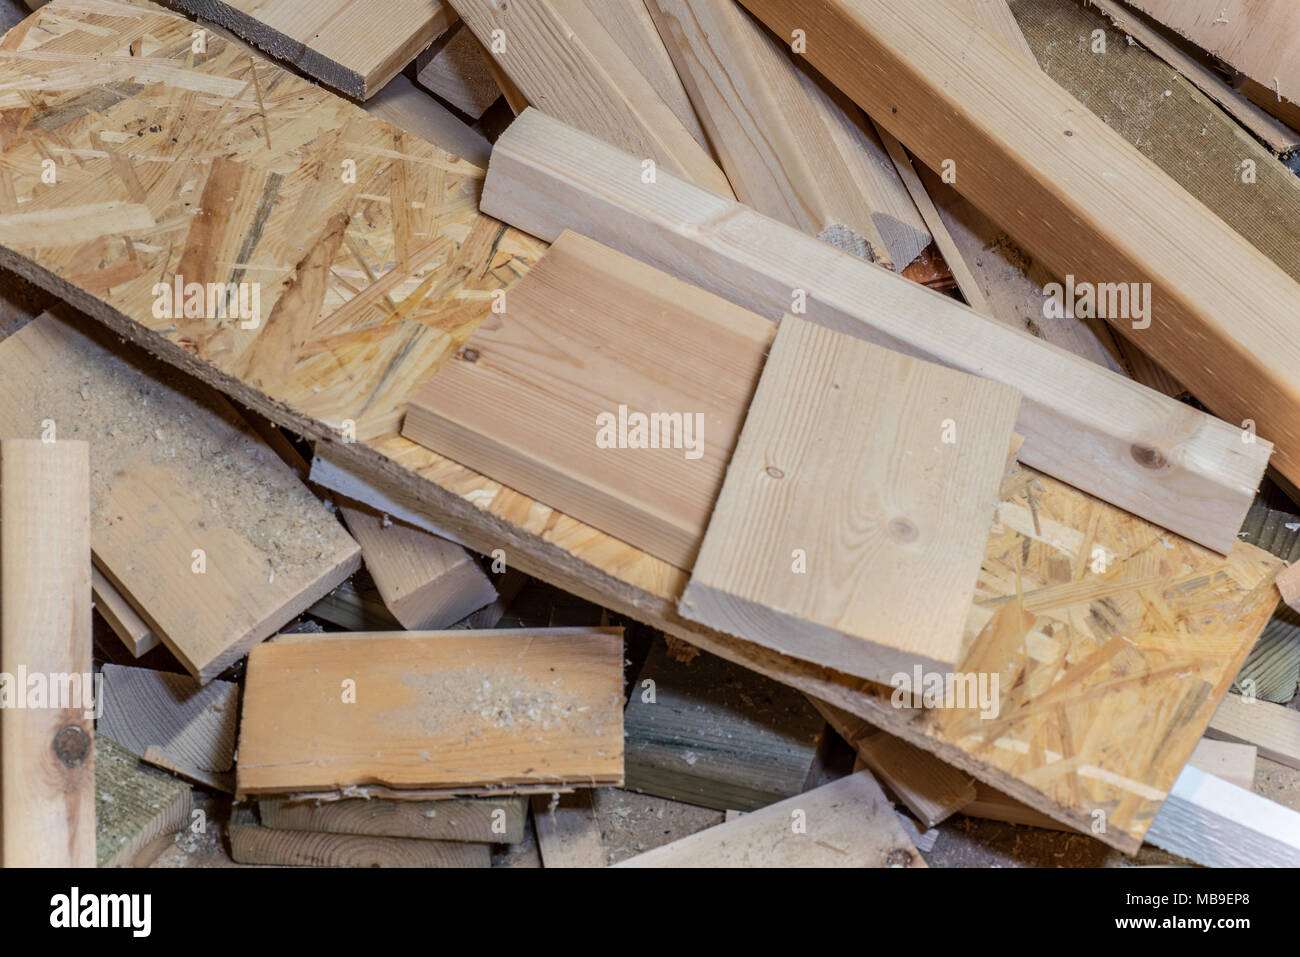 a pile of different sorts of woods and planks Stock Photo